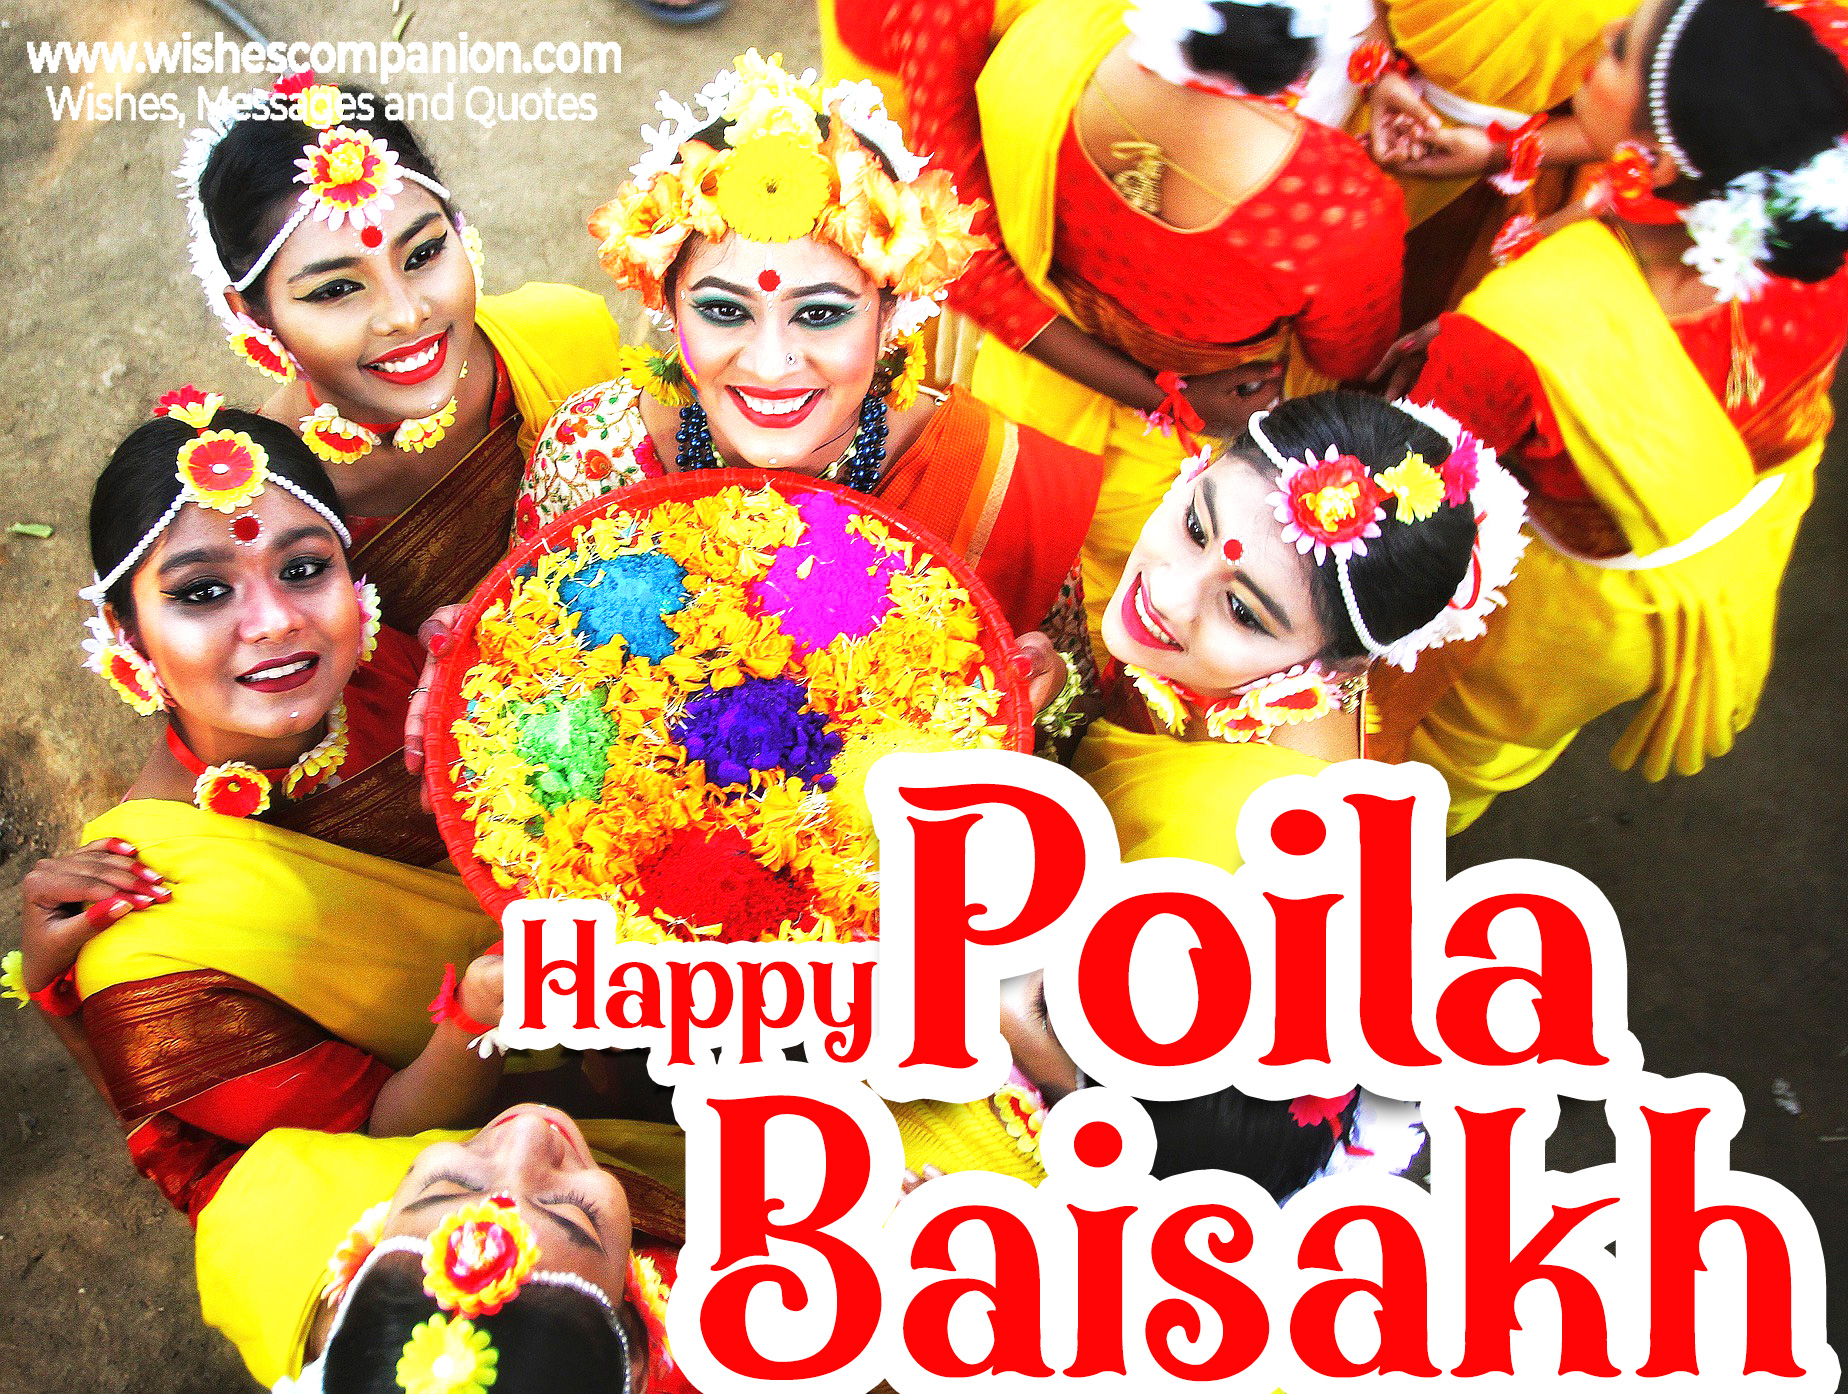 Wishing you a blessed and prosperous Bengali New Year. Stay happy always.